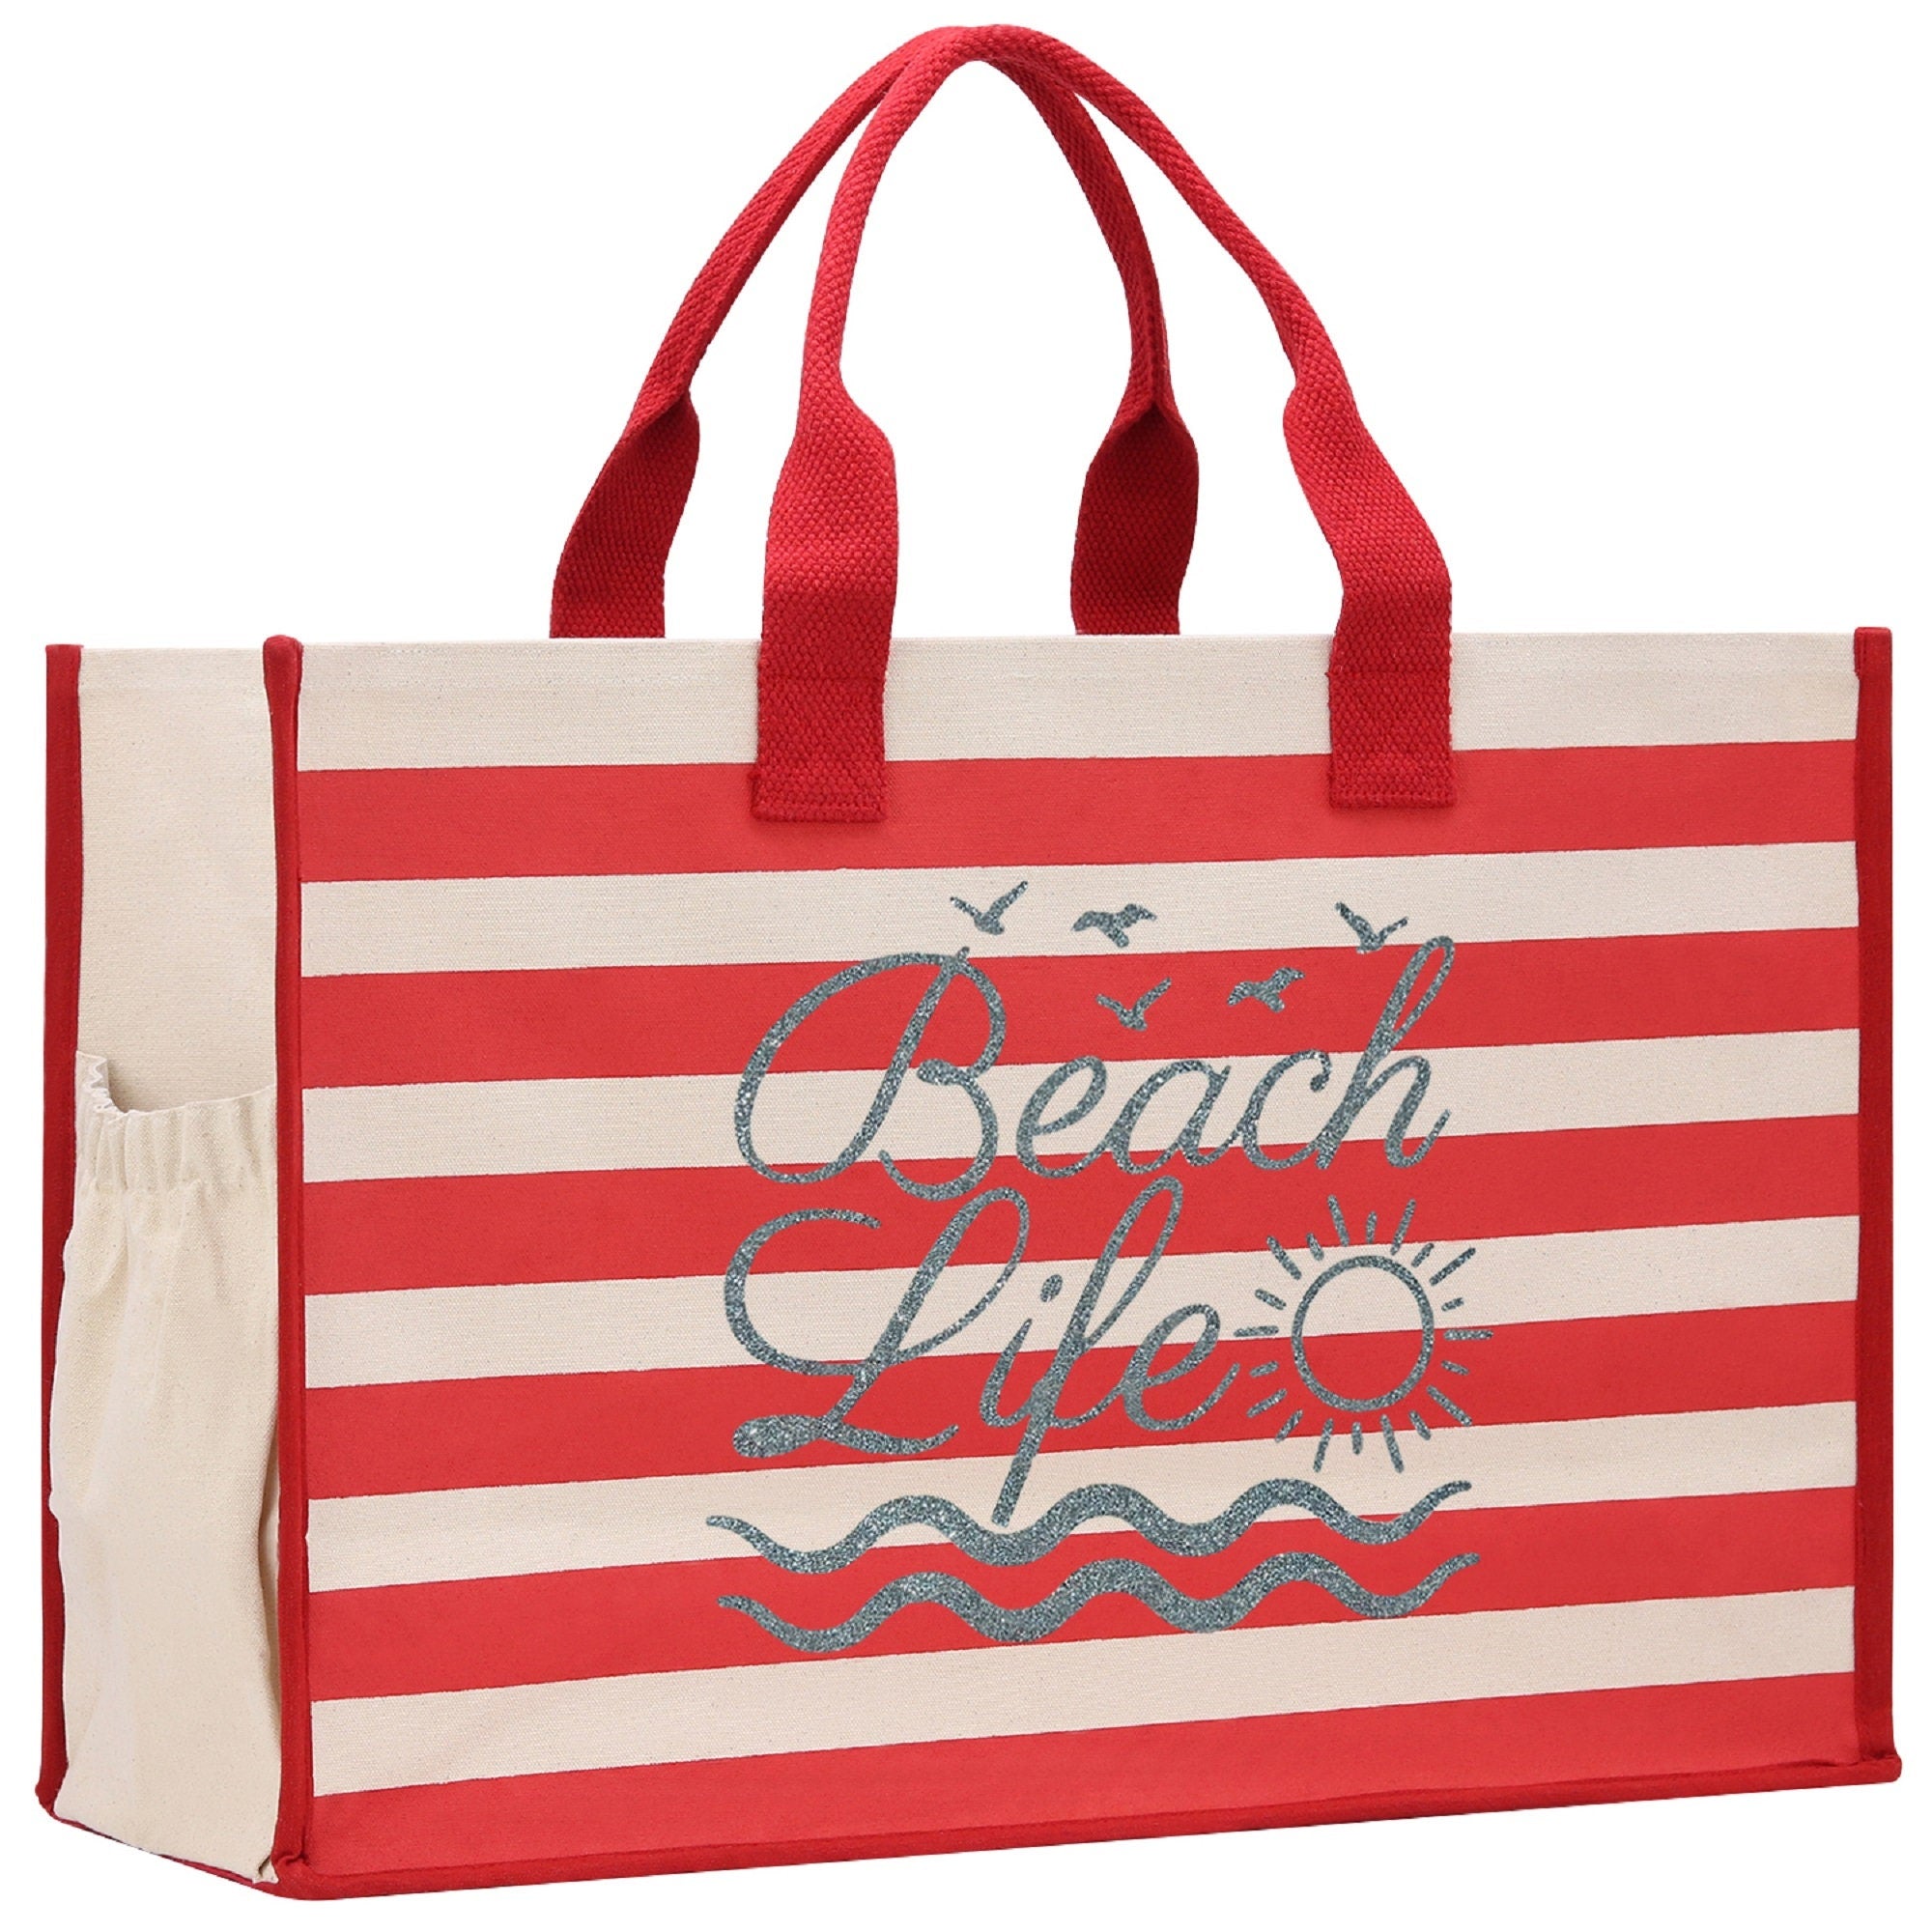 Beach Life Cabana Tote Bag XL - Oversized Chic Tote Bag with Zipper and Inner Pocket - Beach Bag for Women - Weekender Beach Tote